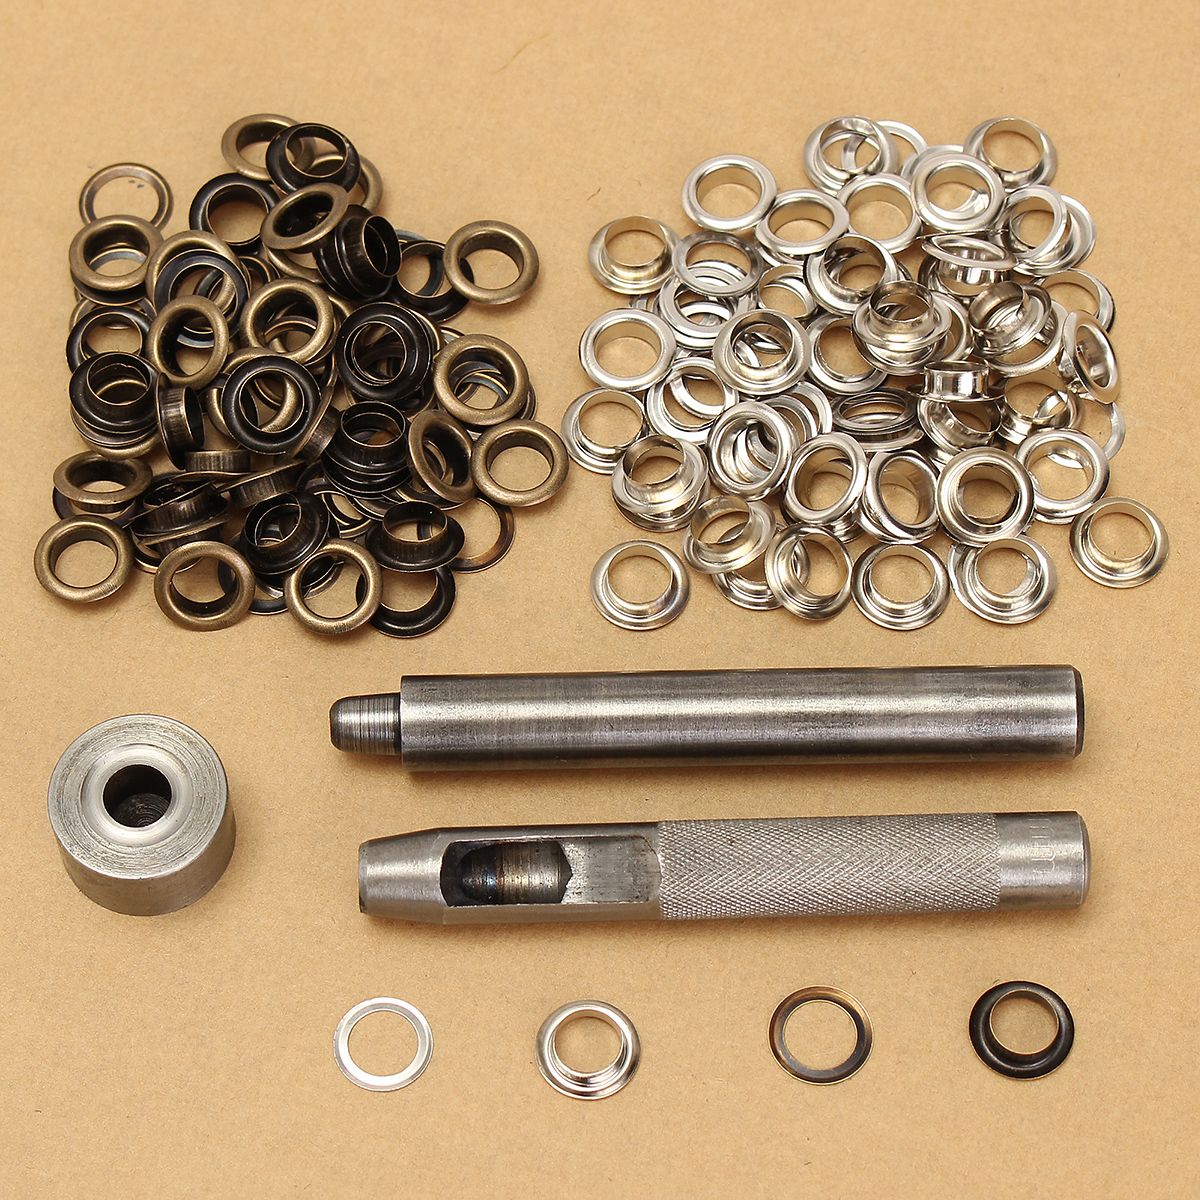 100pcs-8mm-Copper-Eyelets-Hollow-Leather-Craft-Belt-Punch-Tools-Kit-1097233